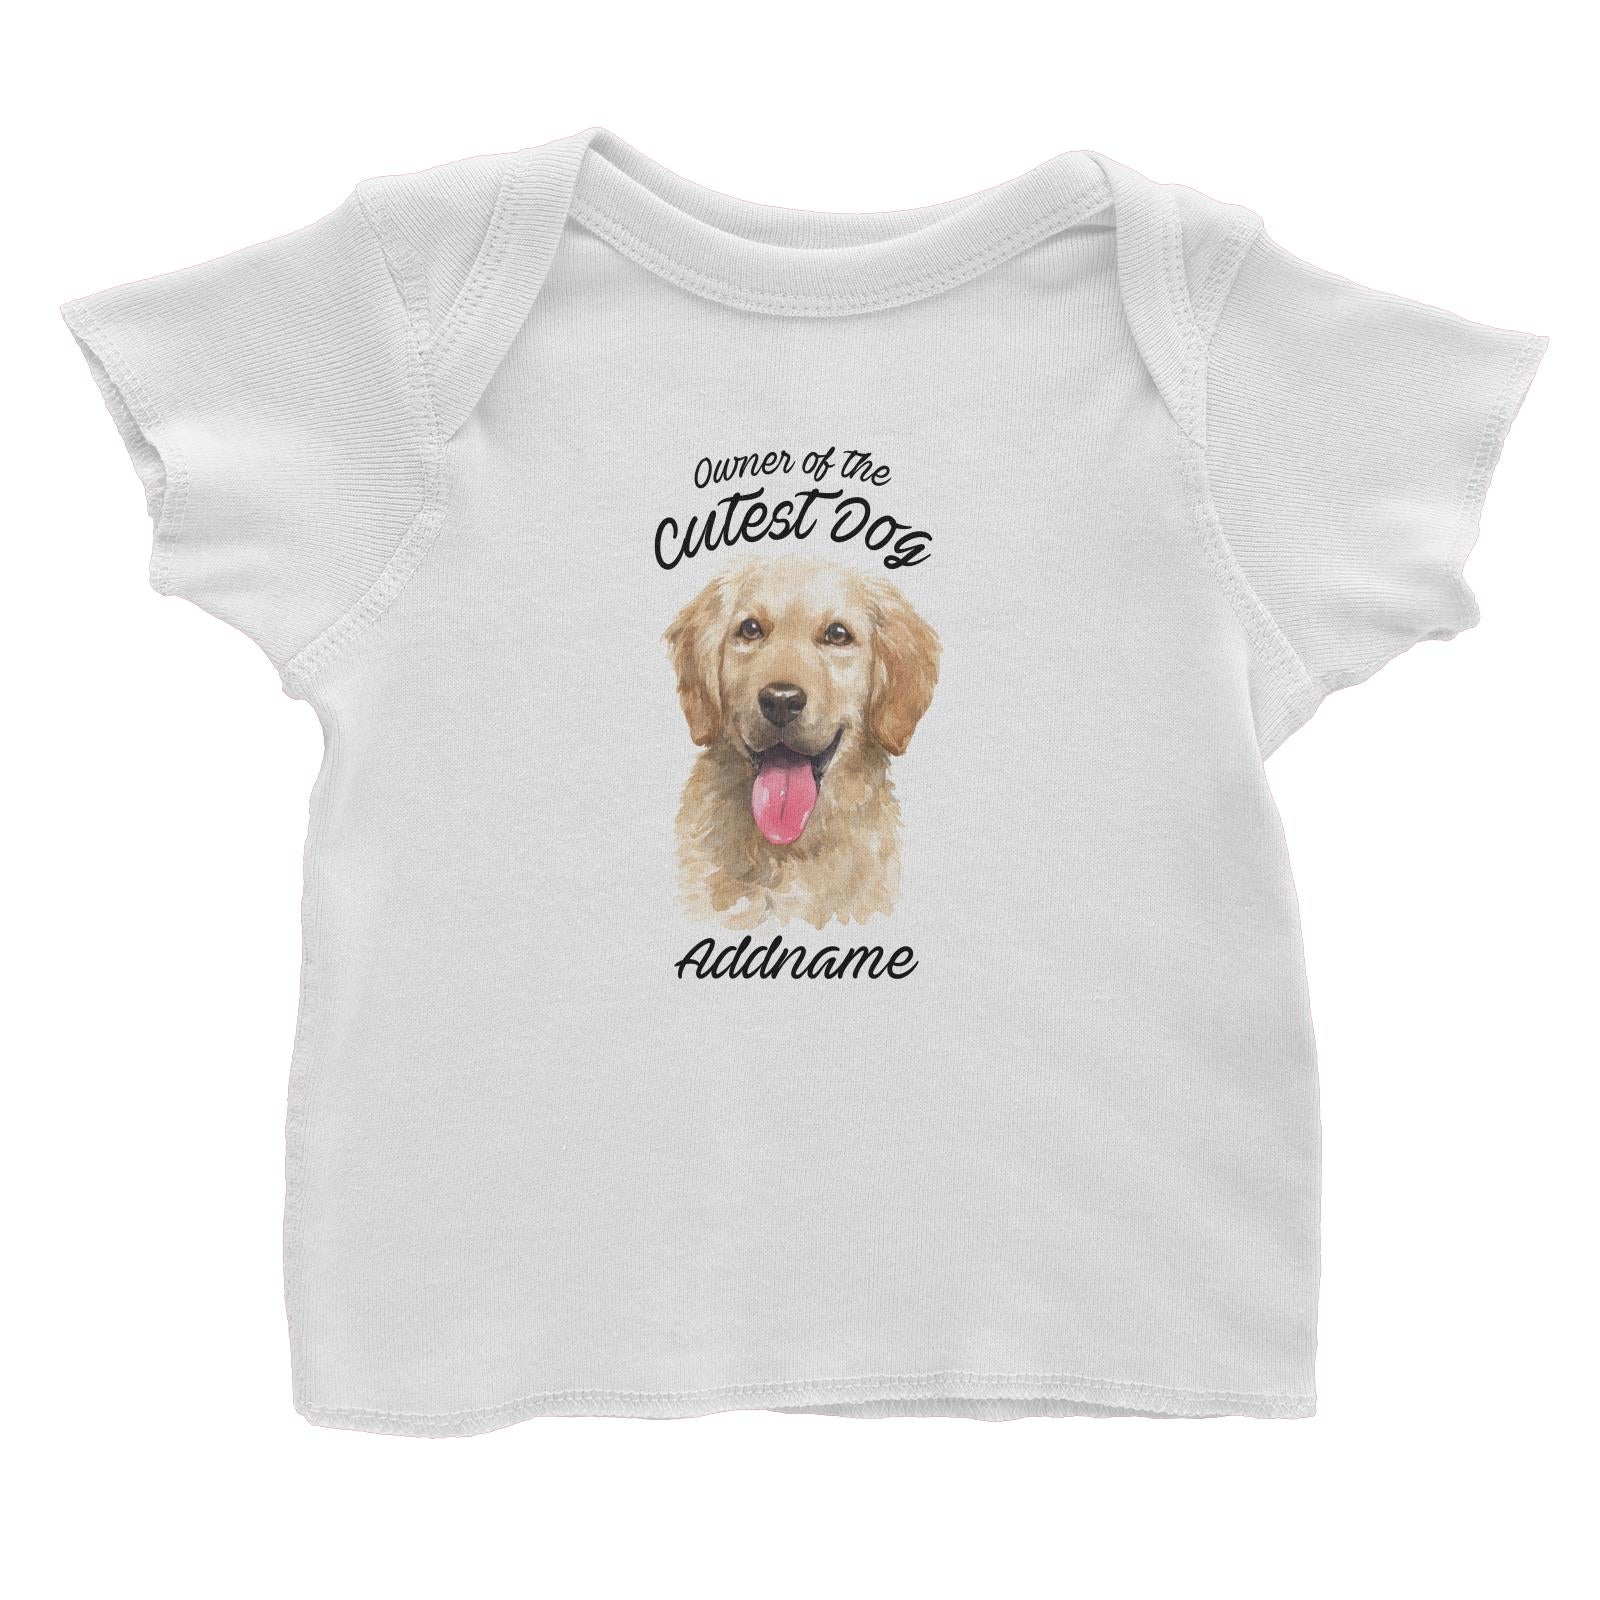 Watercolor Dog Owner Of The Cutest Dog Golden Retriever Front Addname Baby T-Shirt